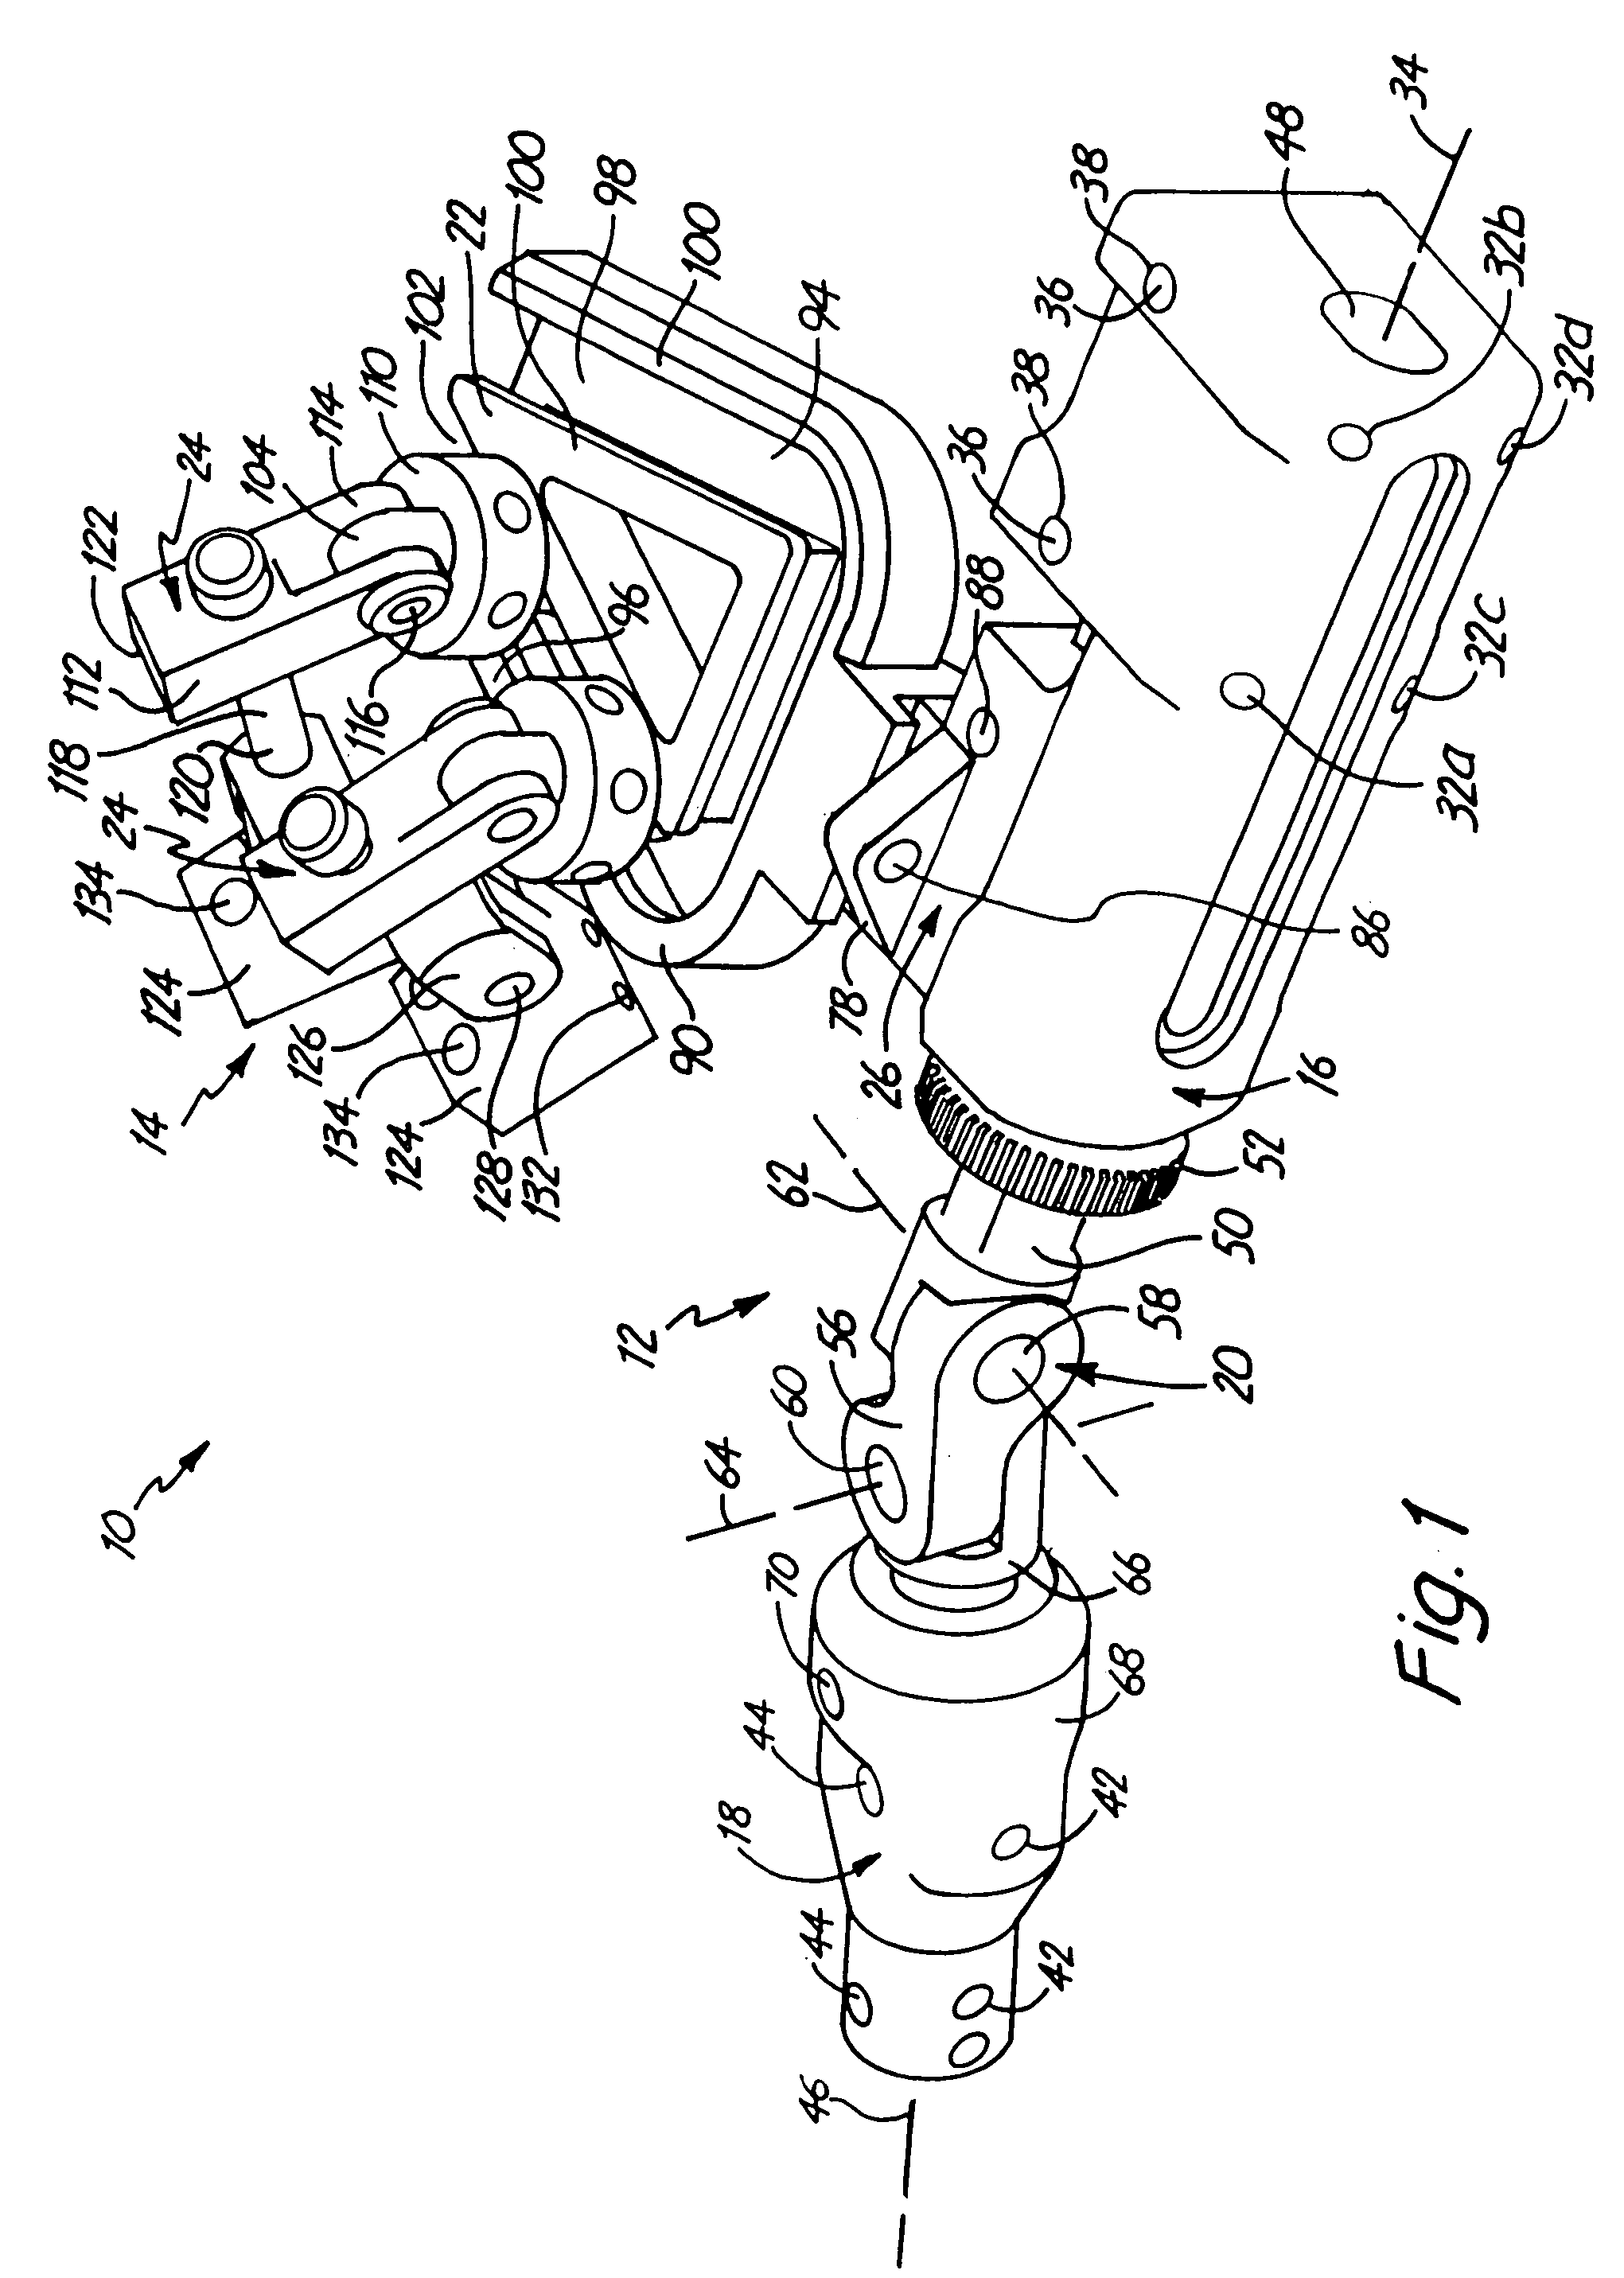 Method of fracture fixation